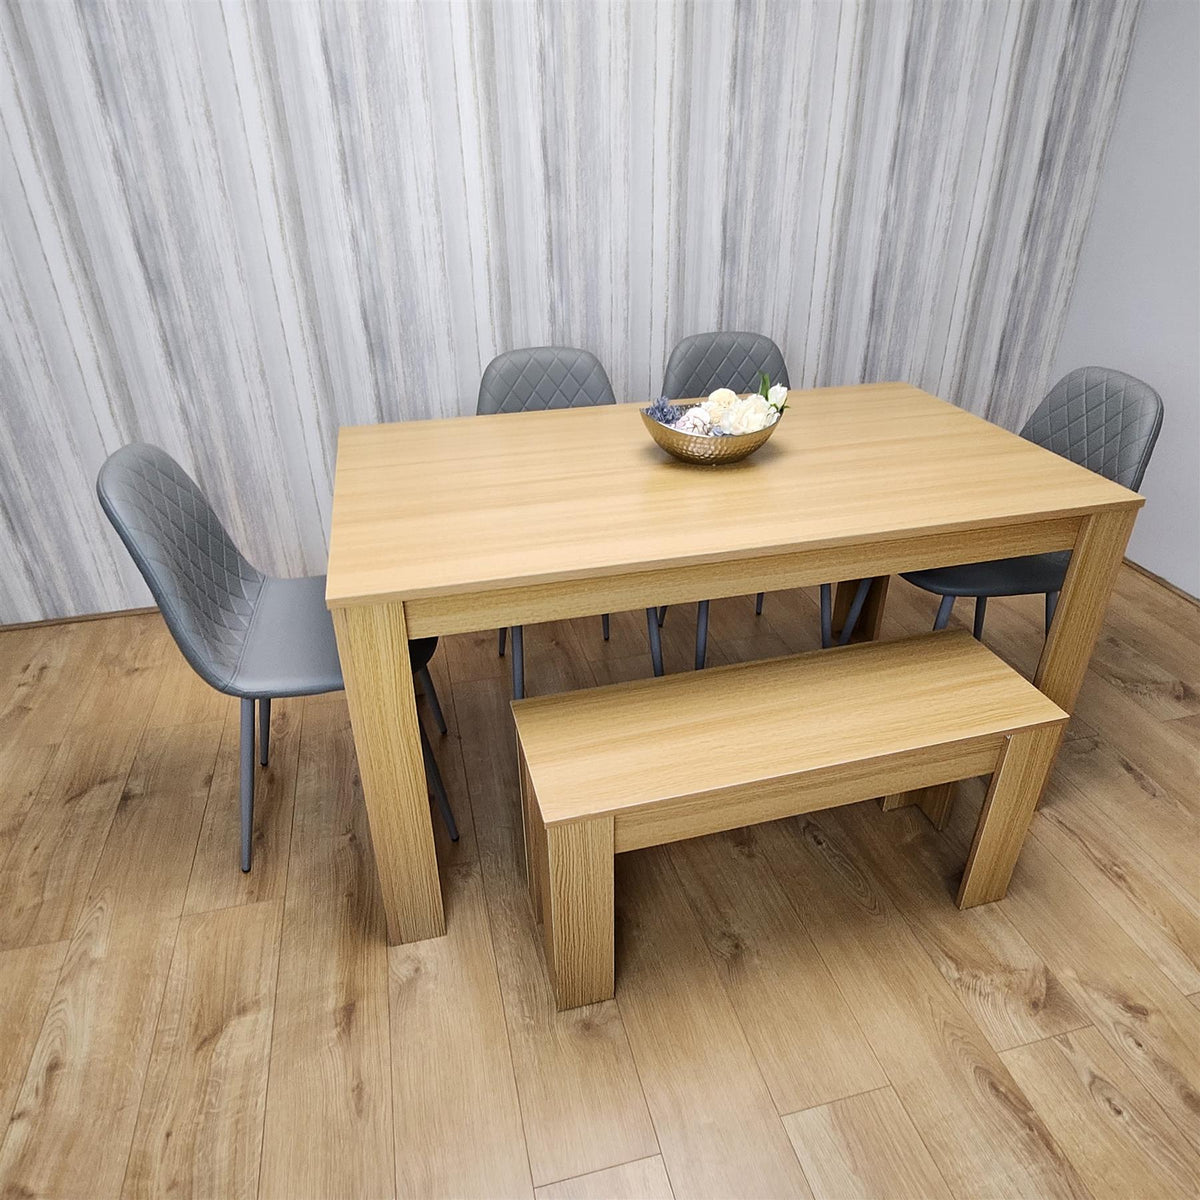 Wooden Dining Table Set for 6 Oak Effect Table With 4 Grey Gem Patterned  Chairs and 1 Bench